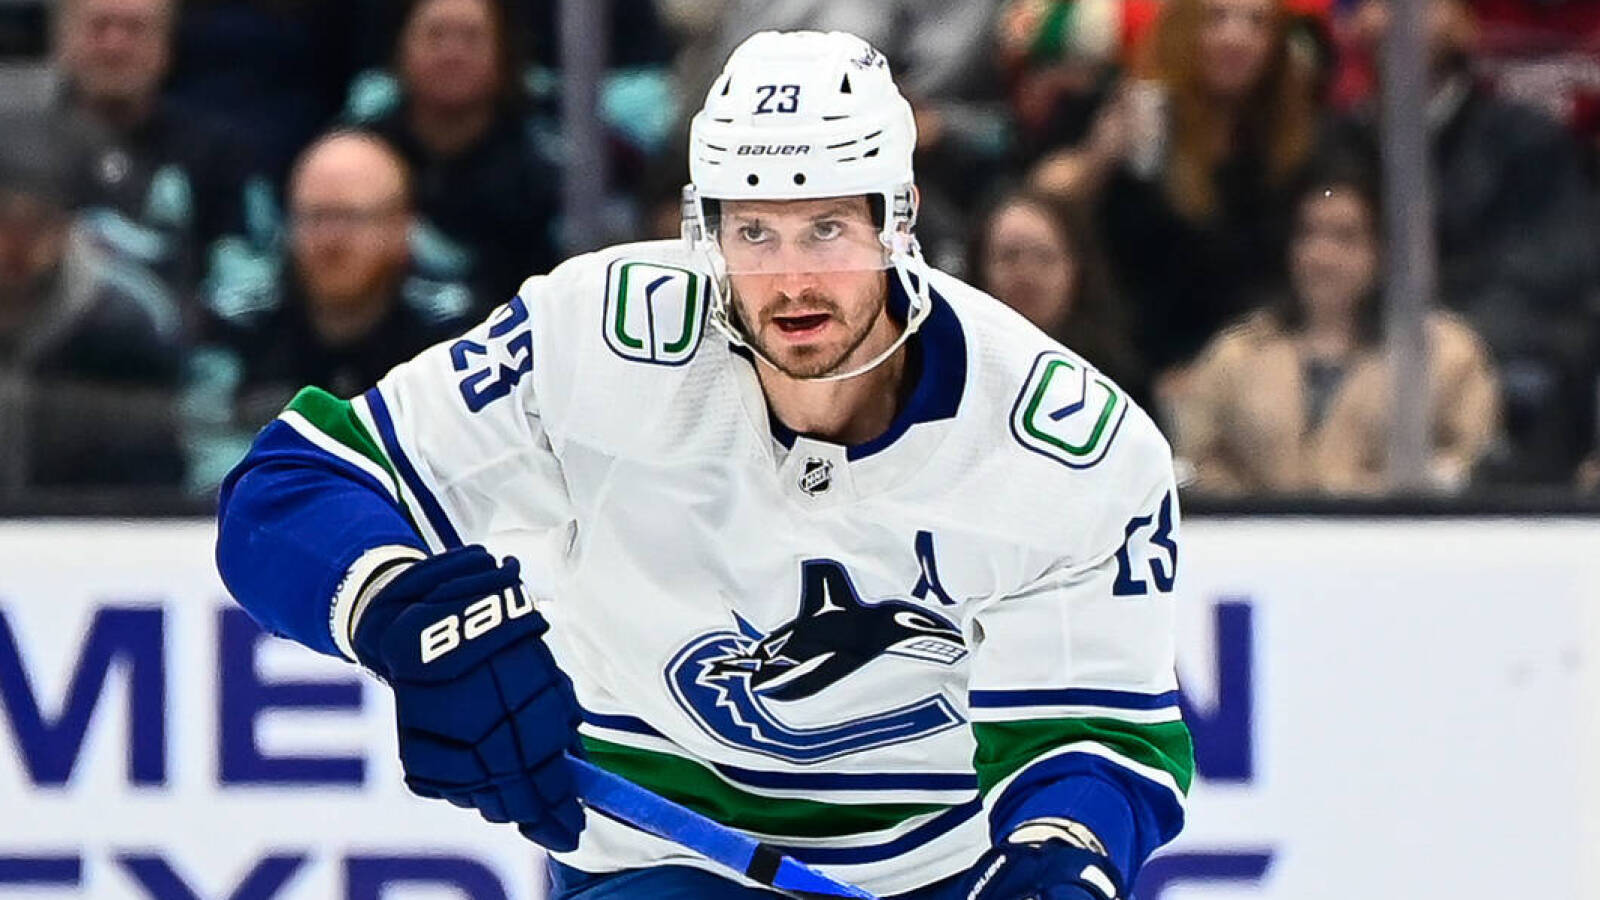 Oliver Ekman-Larsson, the Canuck: Forever overshadowed by Oliver Ekman- Larsson, the trade - CanucksArmy